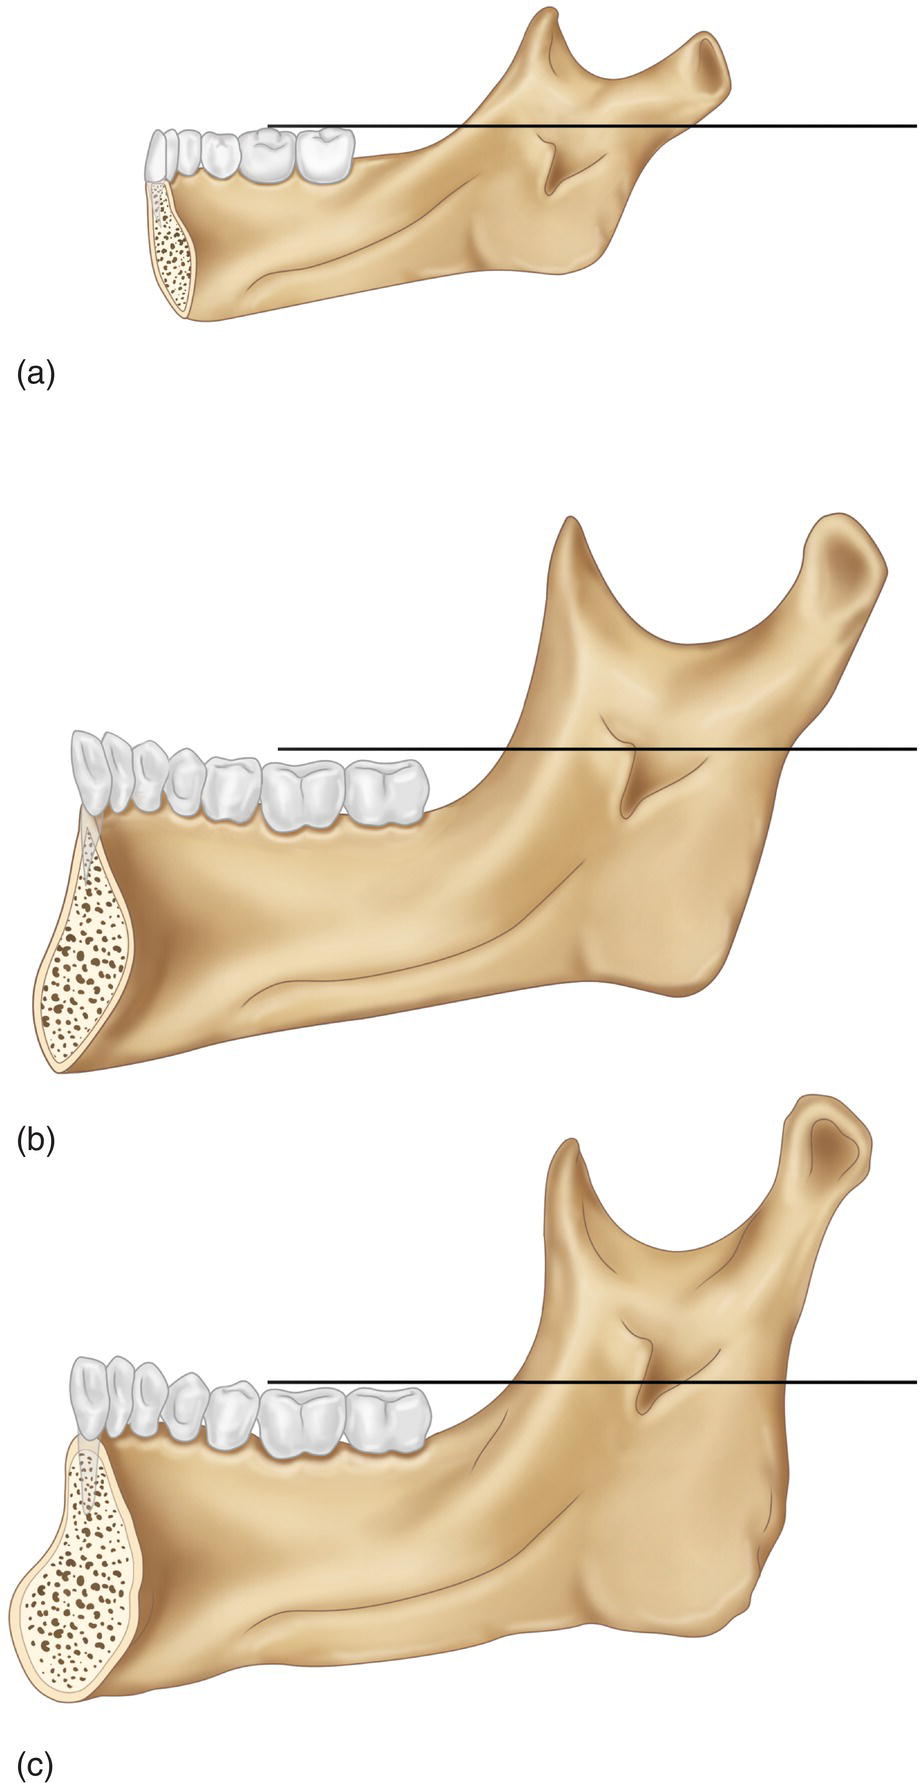 Three illustrations of the increasing lengths of the lingula in the occlusal plane from top to bottom.